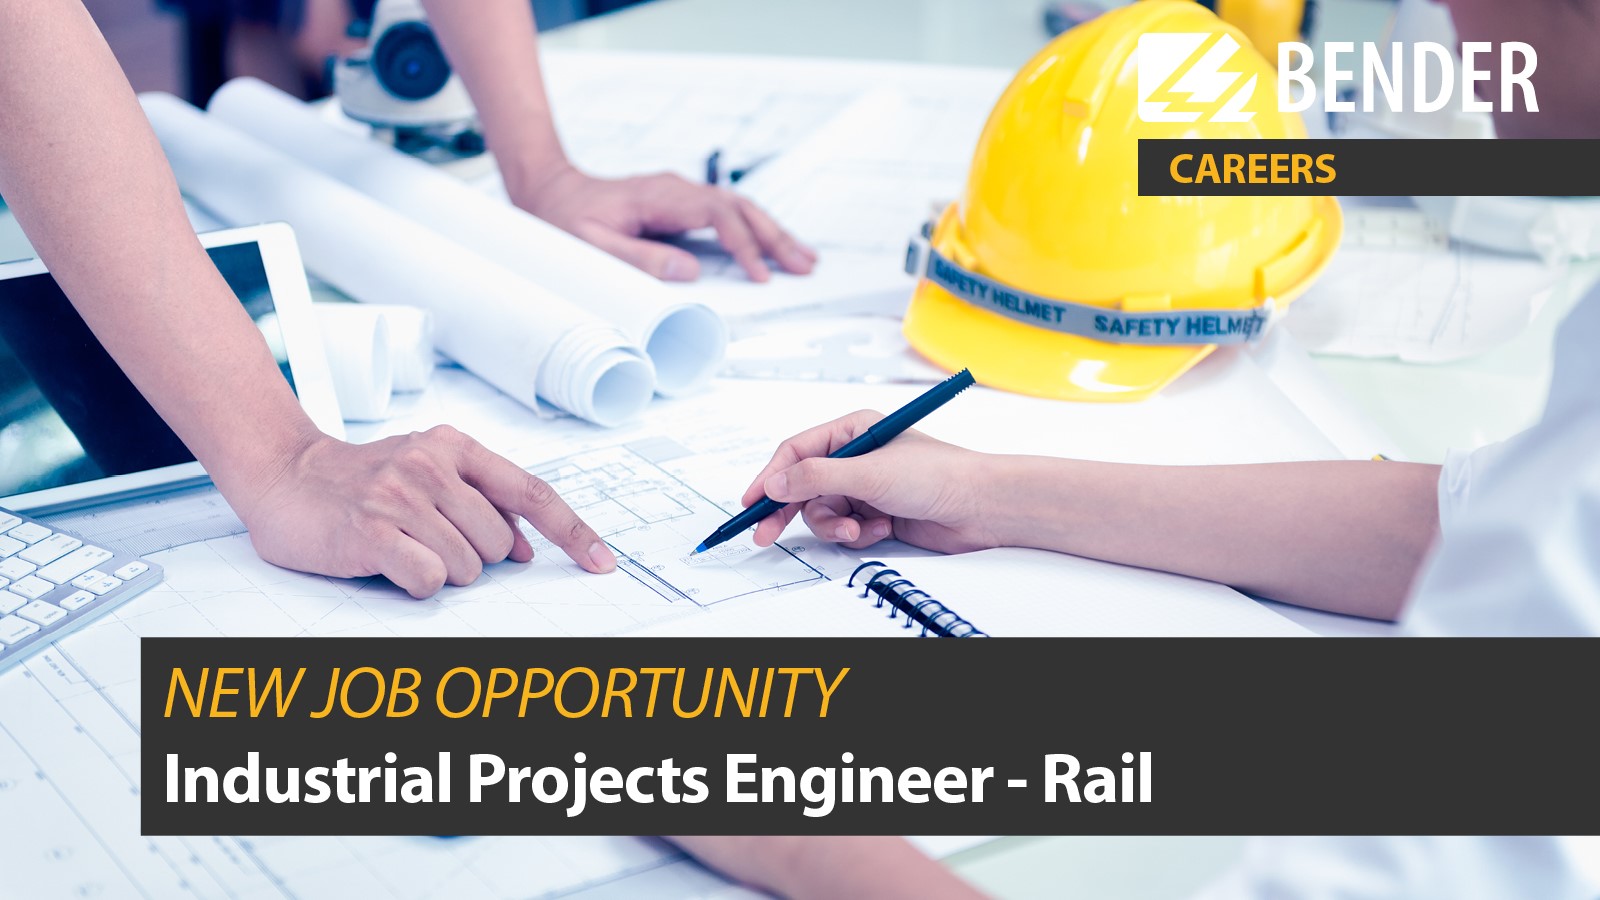 Industrial Projects Engineer - Rail